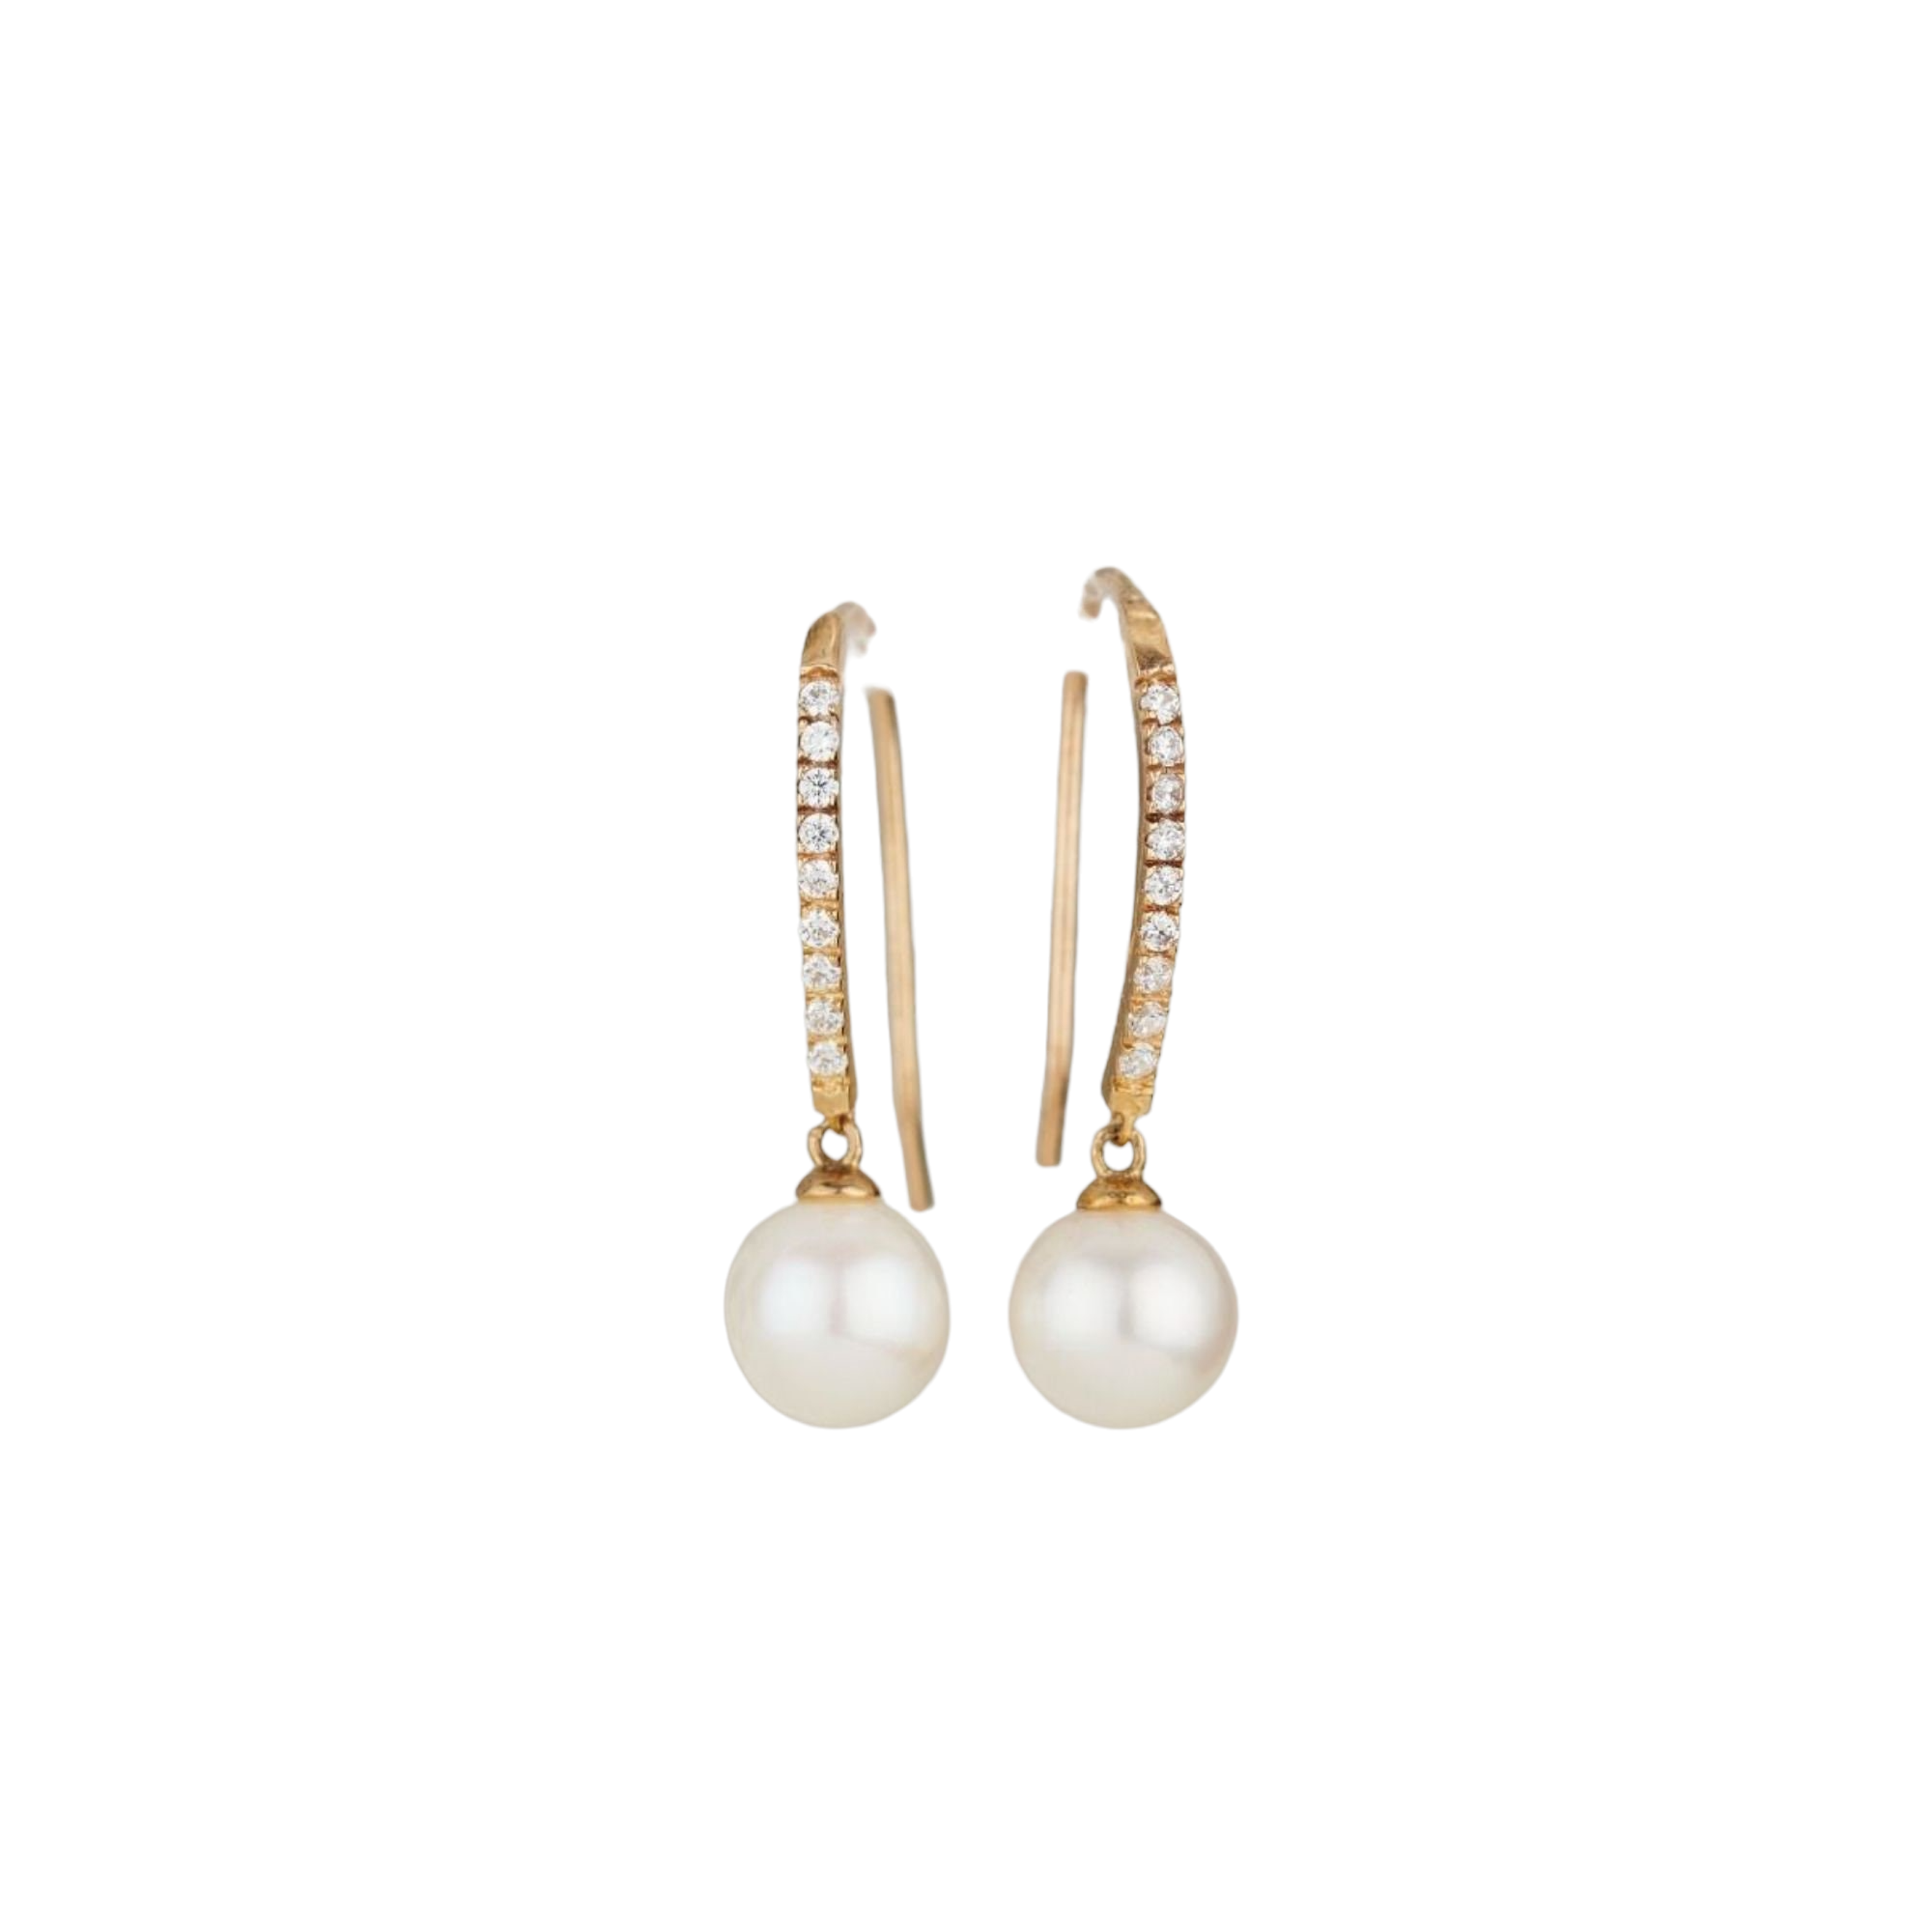 Posh Totty Designs Gold Pearl And Cz Stud Earrings